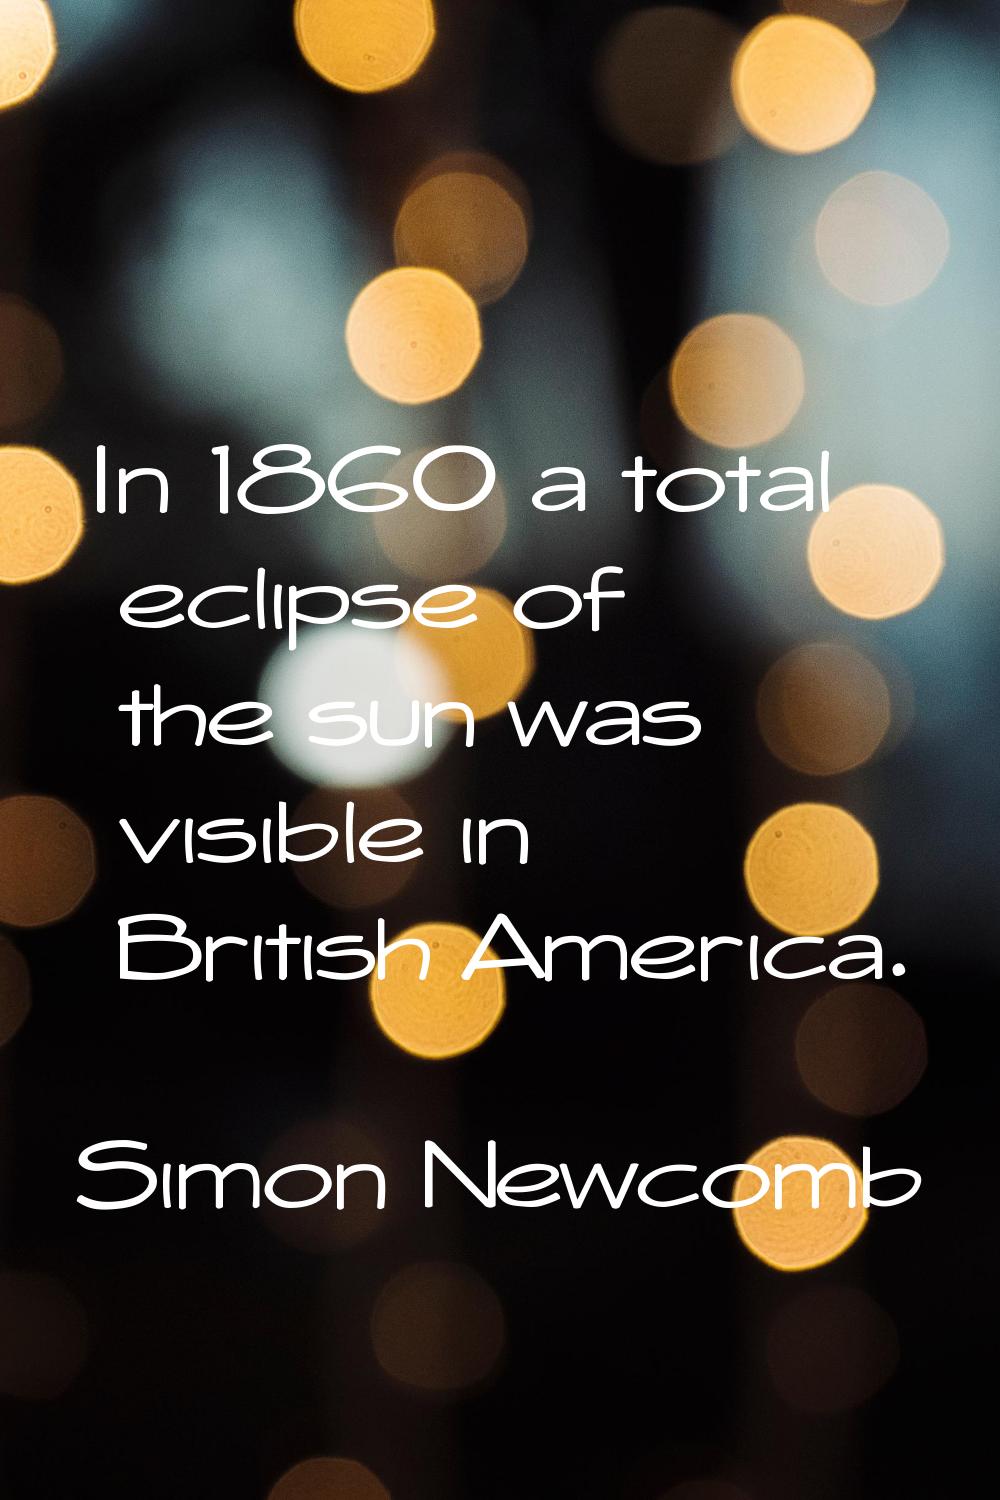 In 1860 a total eclipse of the sun was visible in British America.